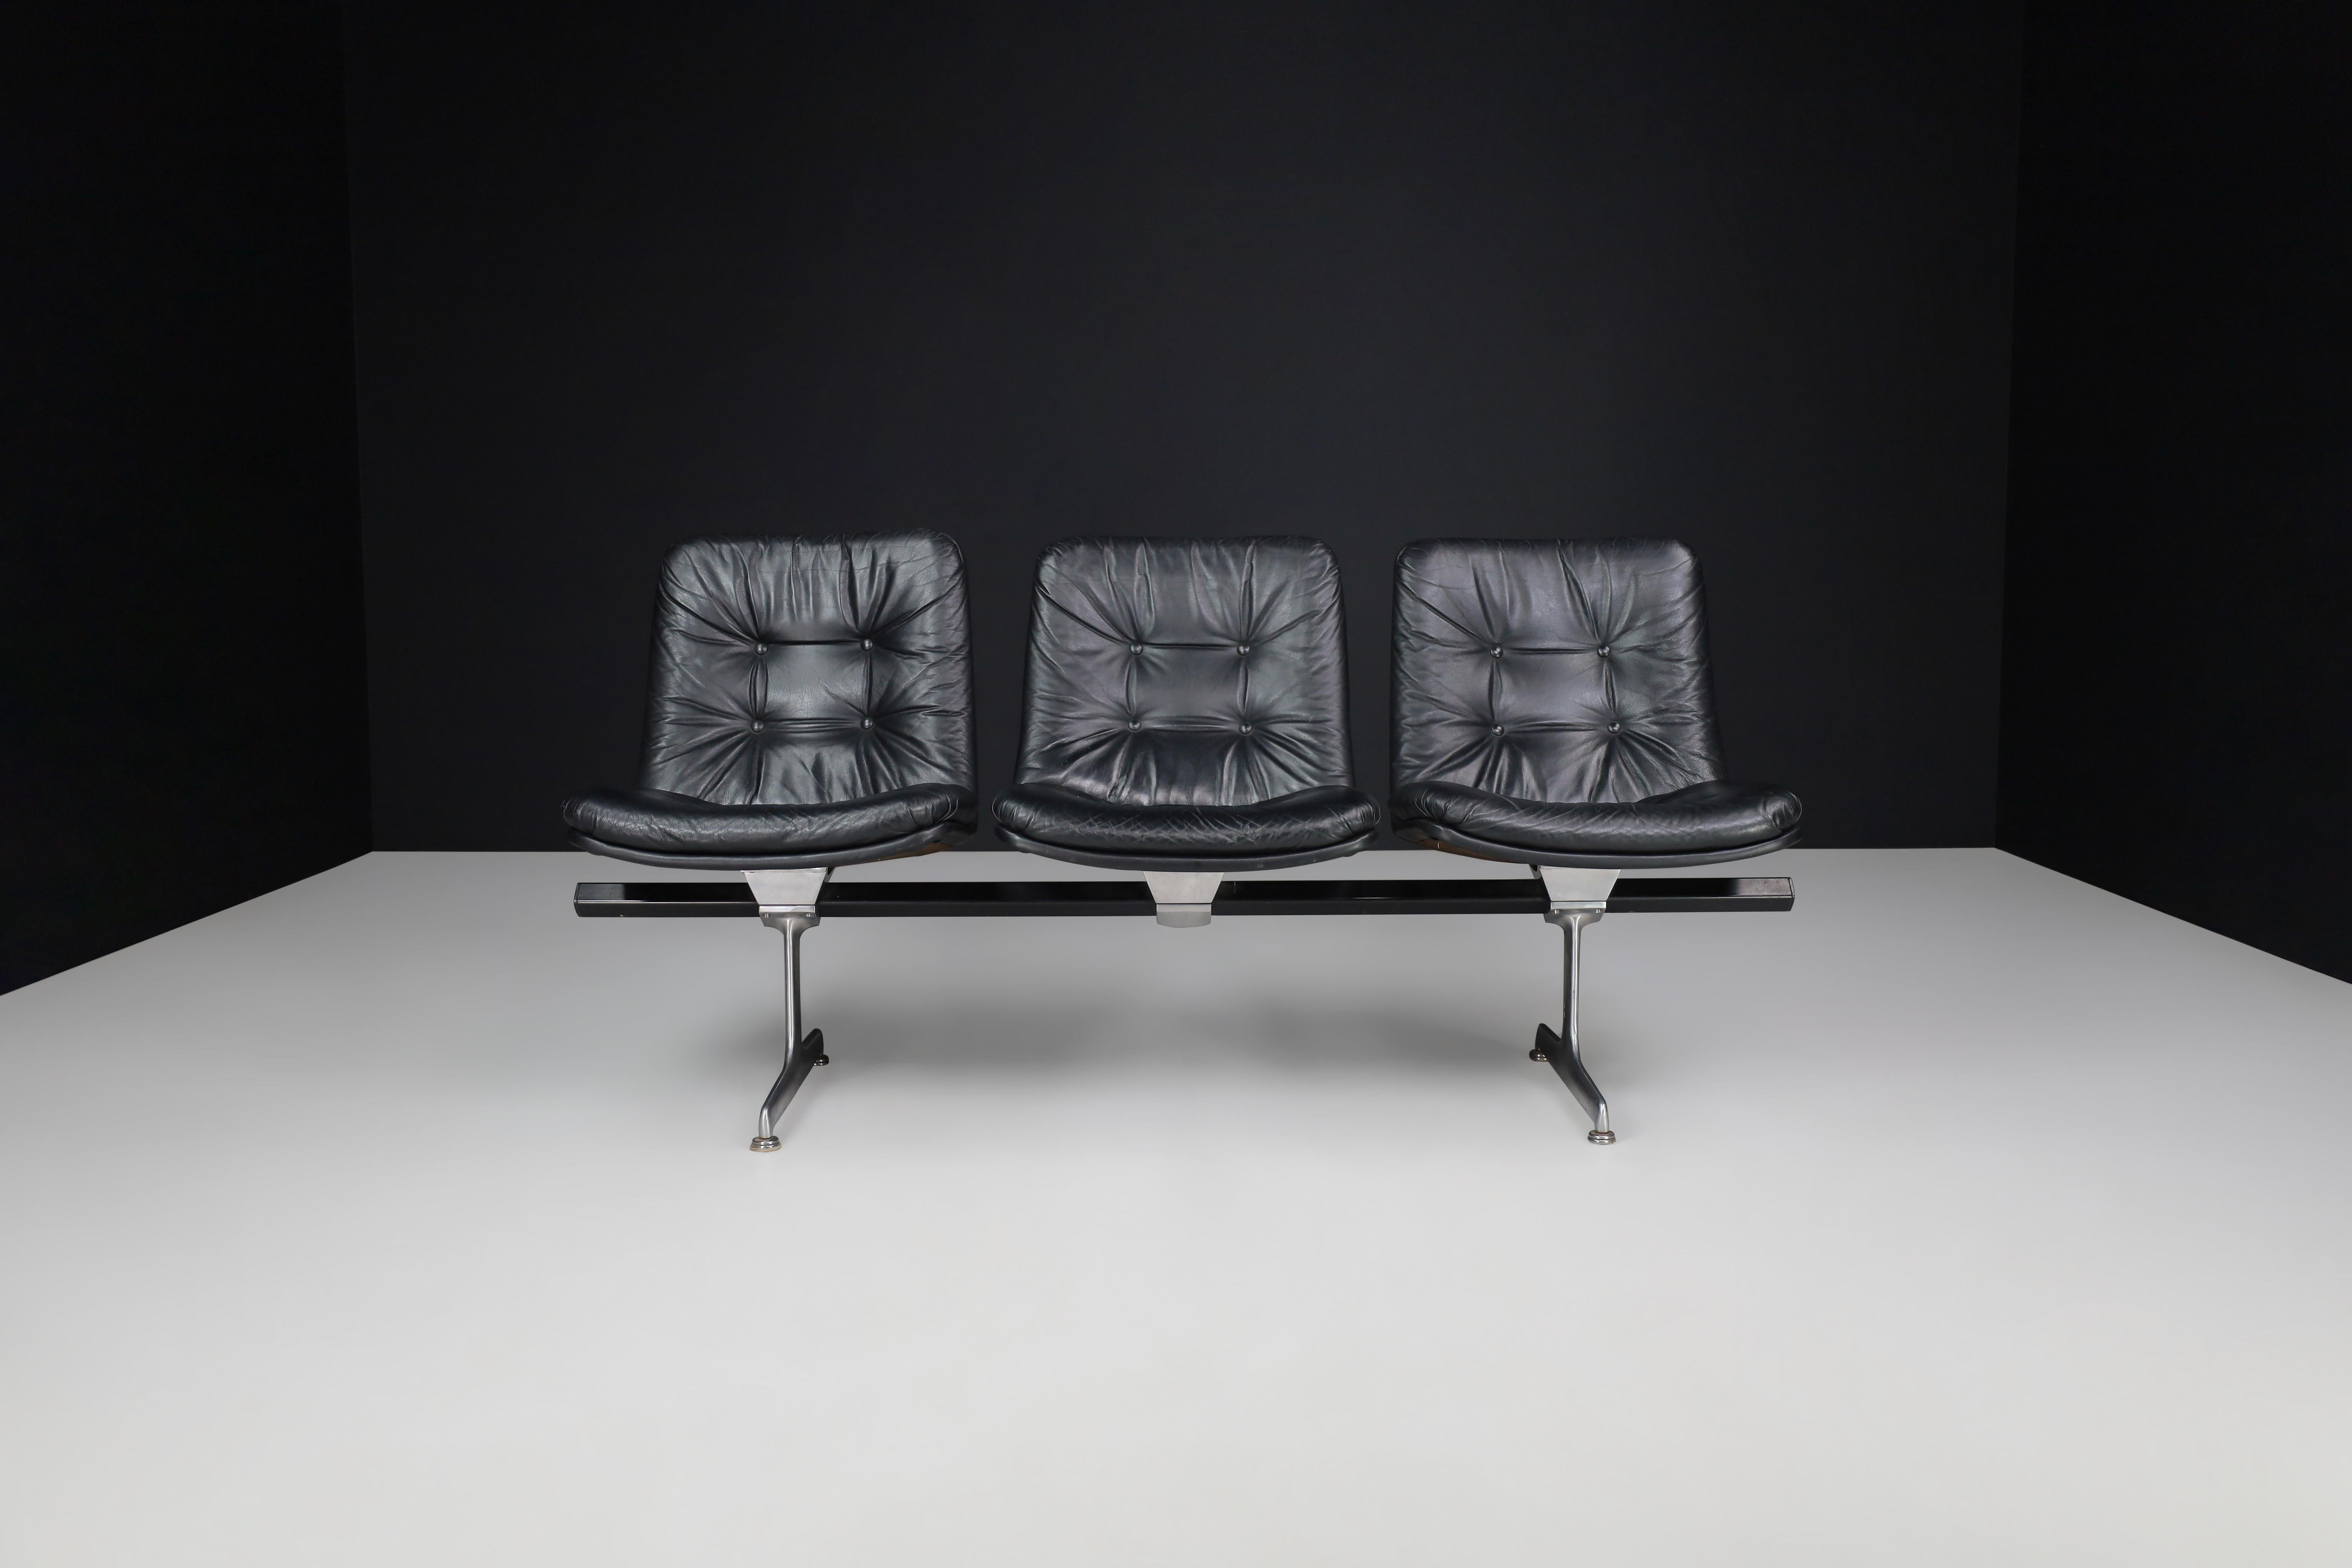 Geoffrey Harcourt Leather Bench for Artifort, The Netherlands 1960s

This mid-century modern bench, designed by Geoffrey D. Harcourt for Artifort in the 1960s, is the perfect addition to any office or waiting area. The modular seating system